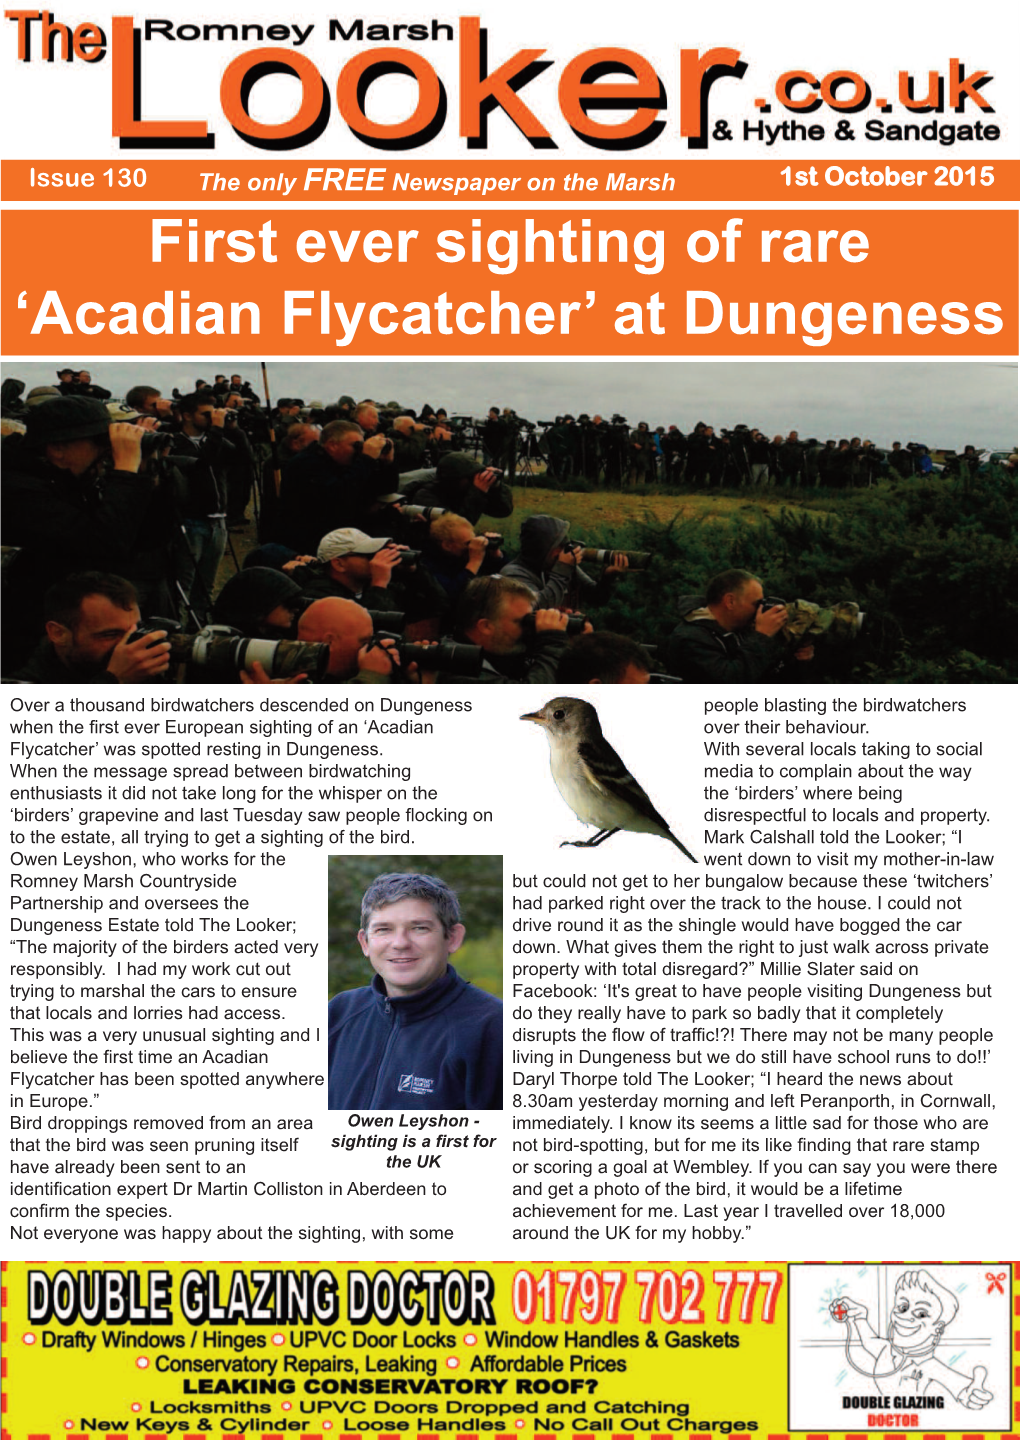 First Ever Sighting of Rare 'Acadian Flycatcher' at Dungeness